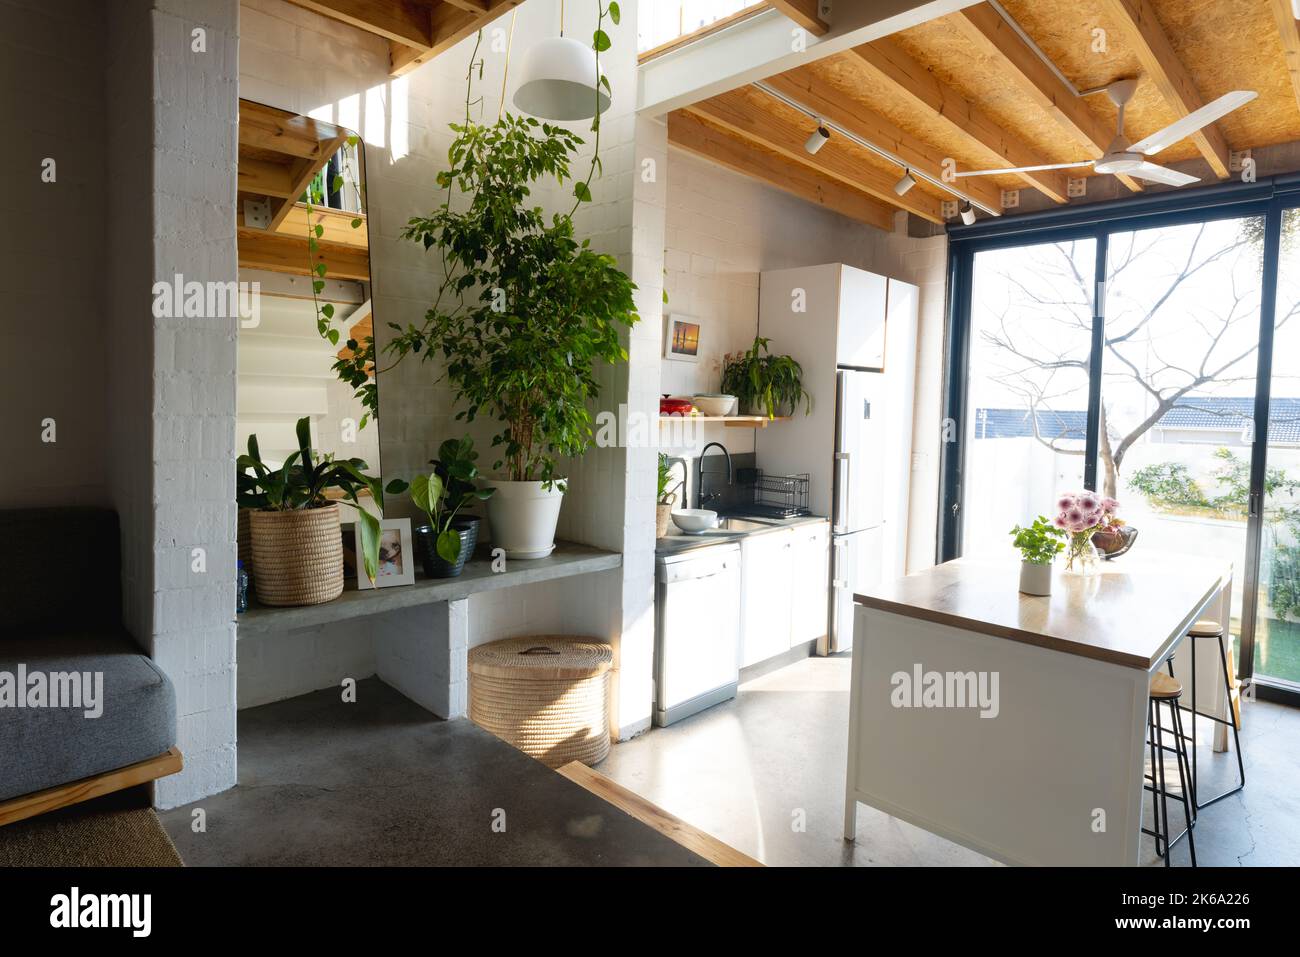 General view of modern kitchen with countertop, kitchen equipment and window Stock Photo